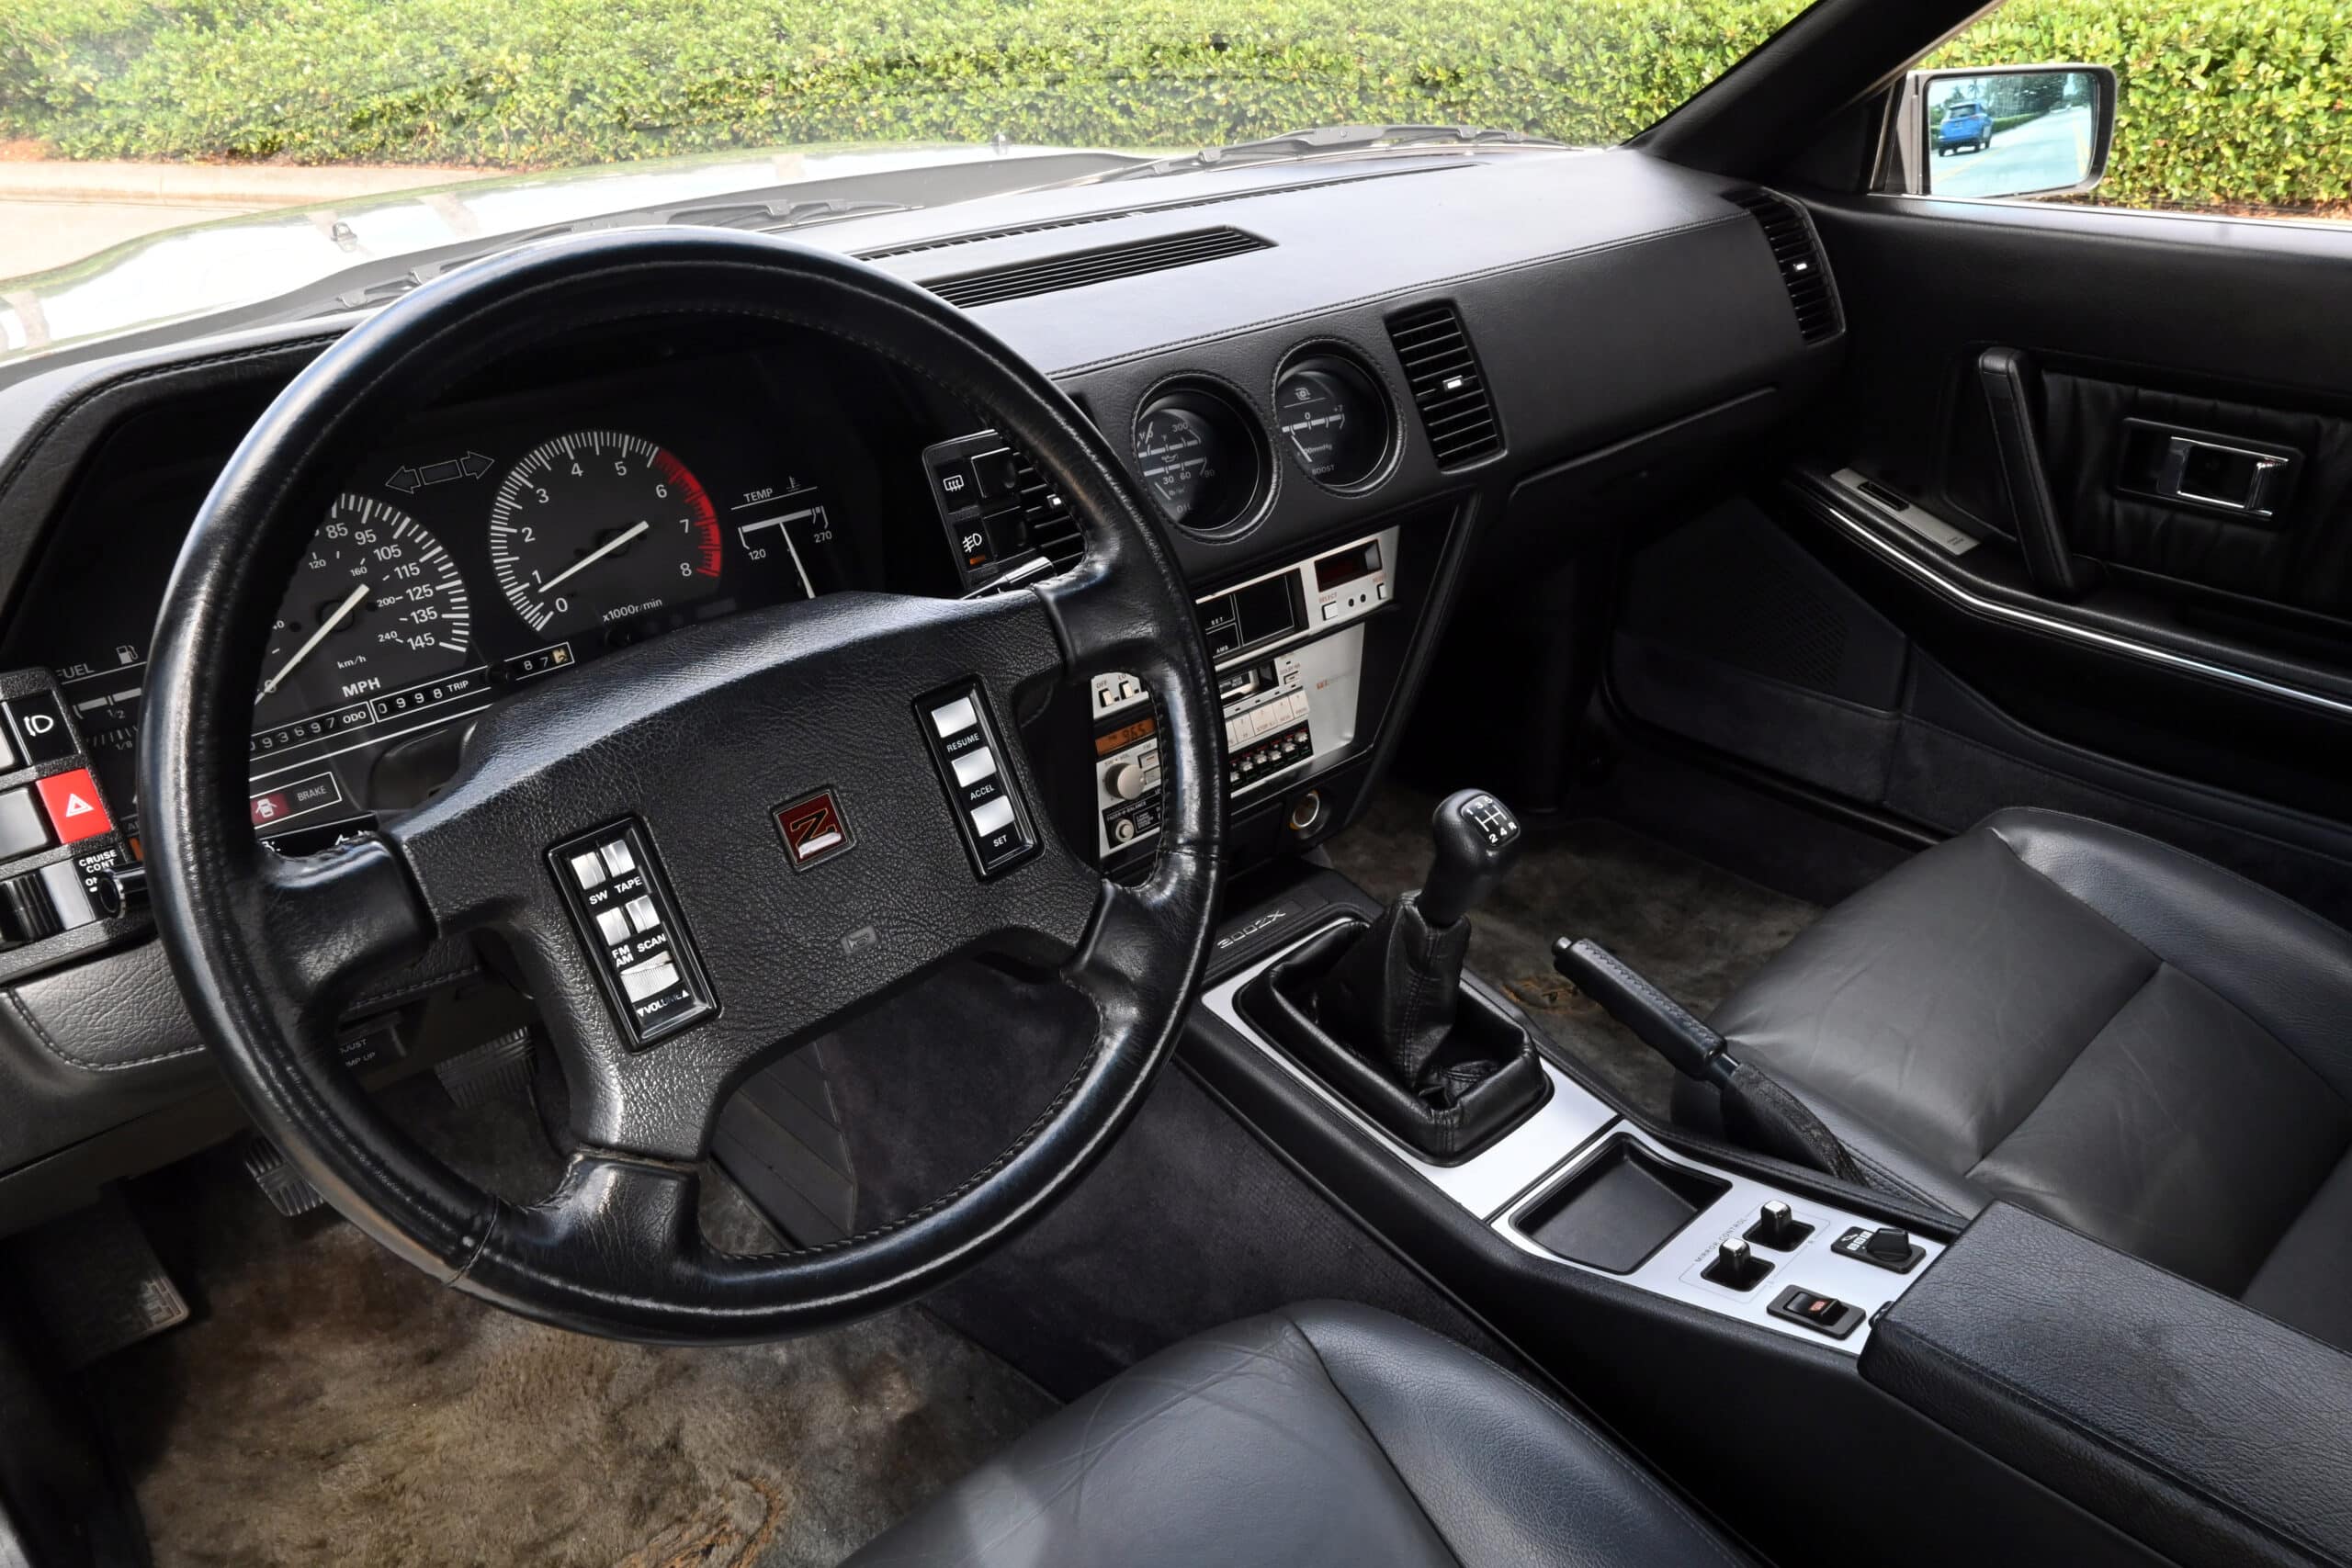 1987 Nissan 300 ZX, 5-speed turbo, same collector owner for 30 years, service records, all electronics work, garage kept time capsule